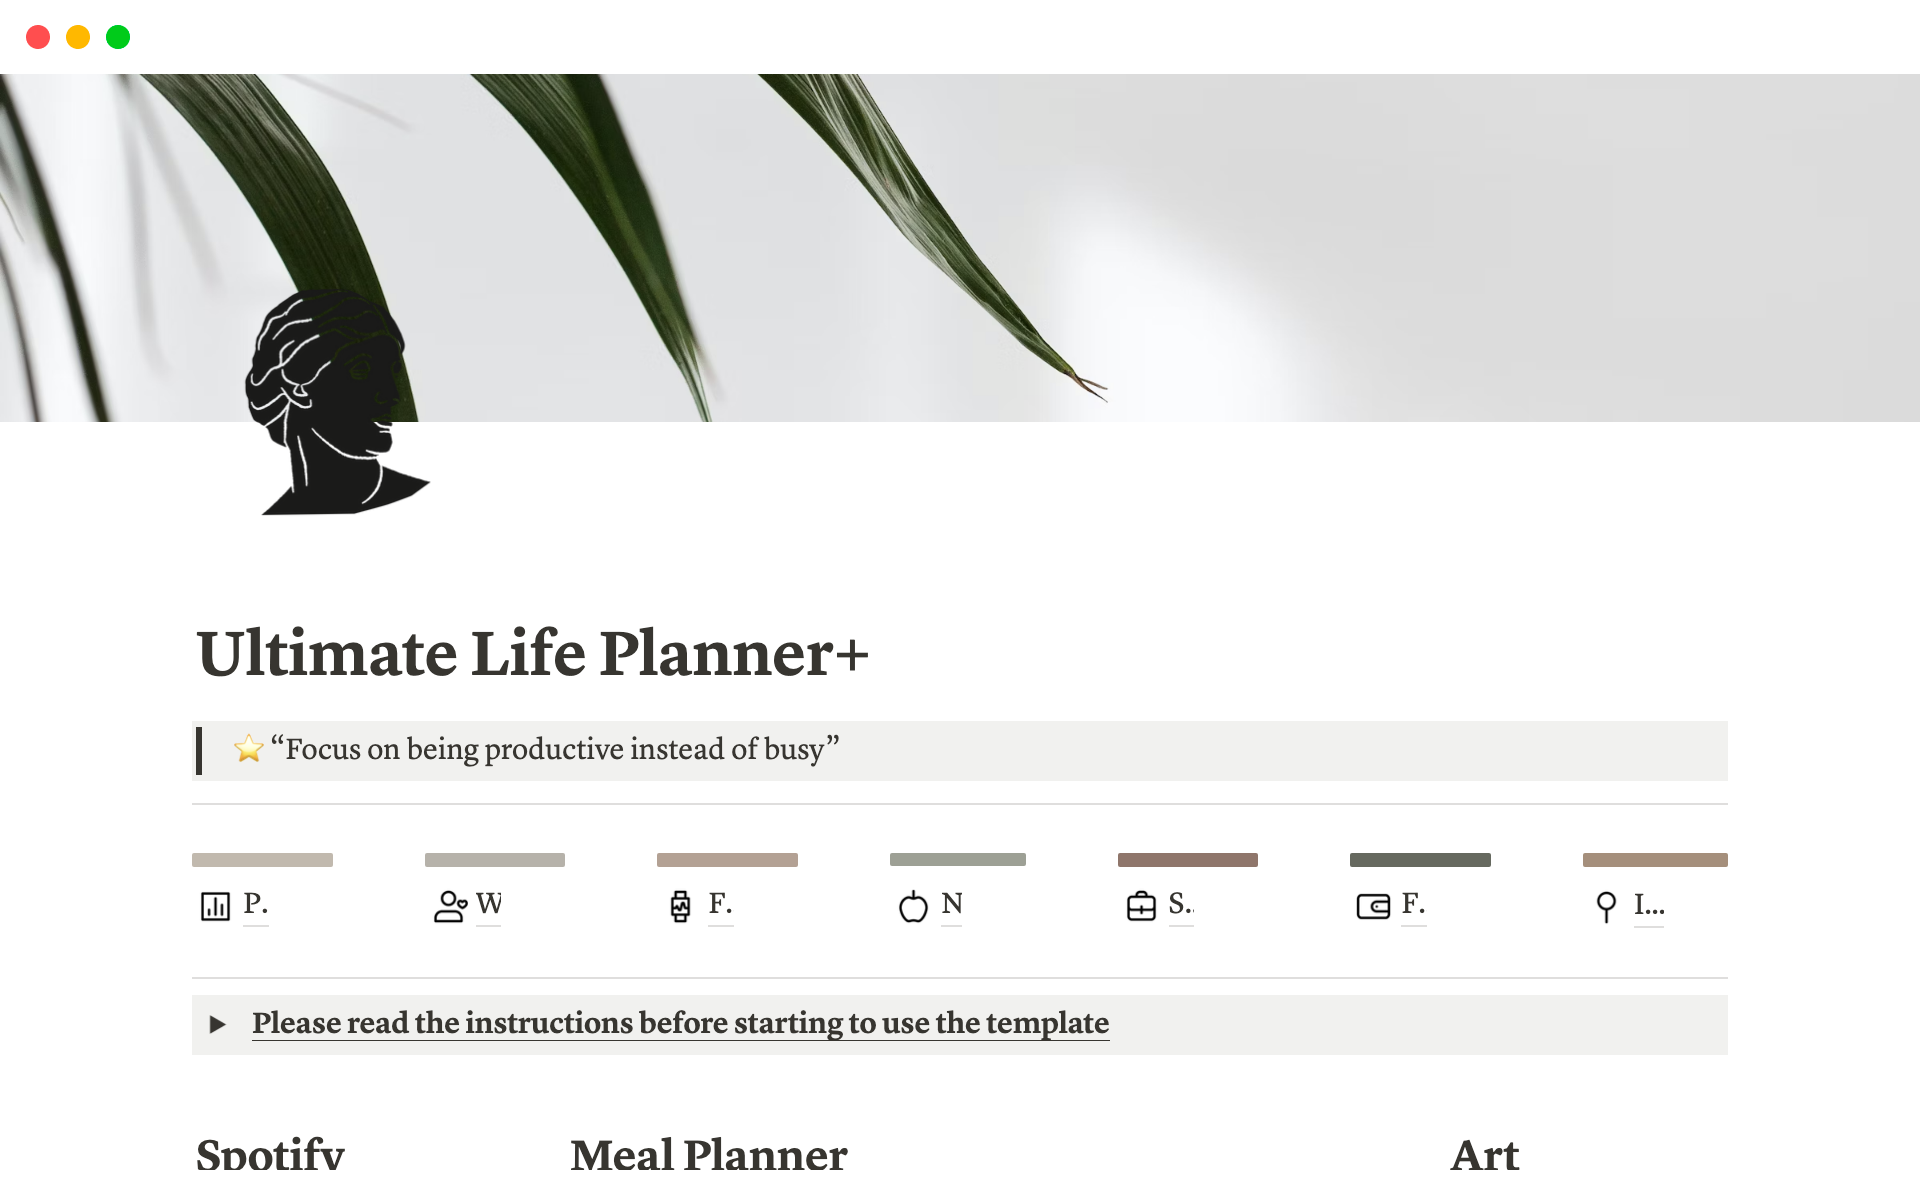 All-in-one Life Planner Notion Template – Wethenotion